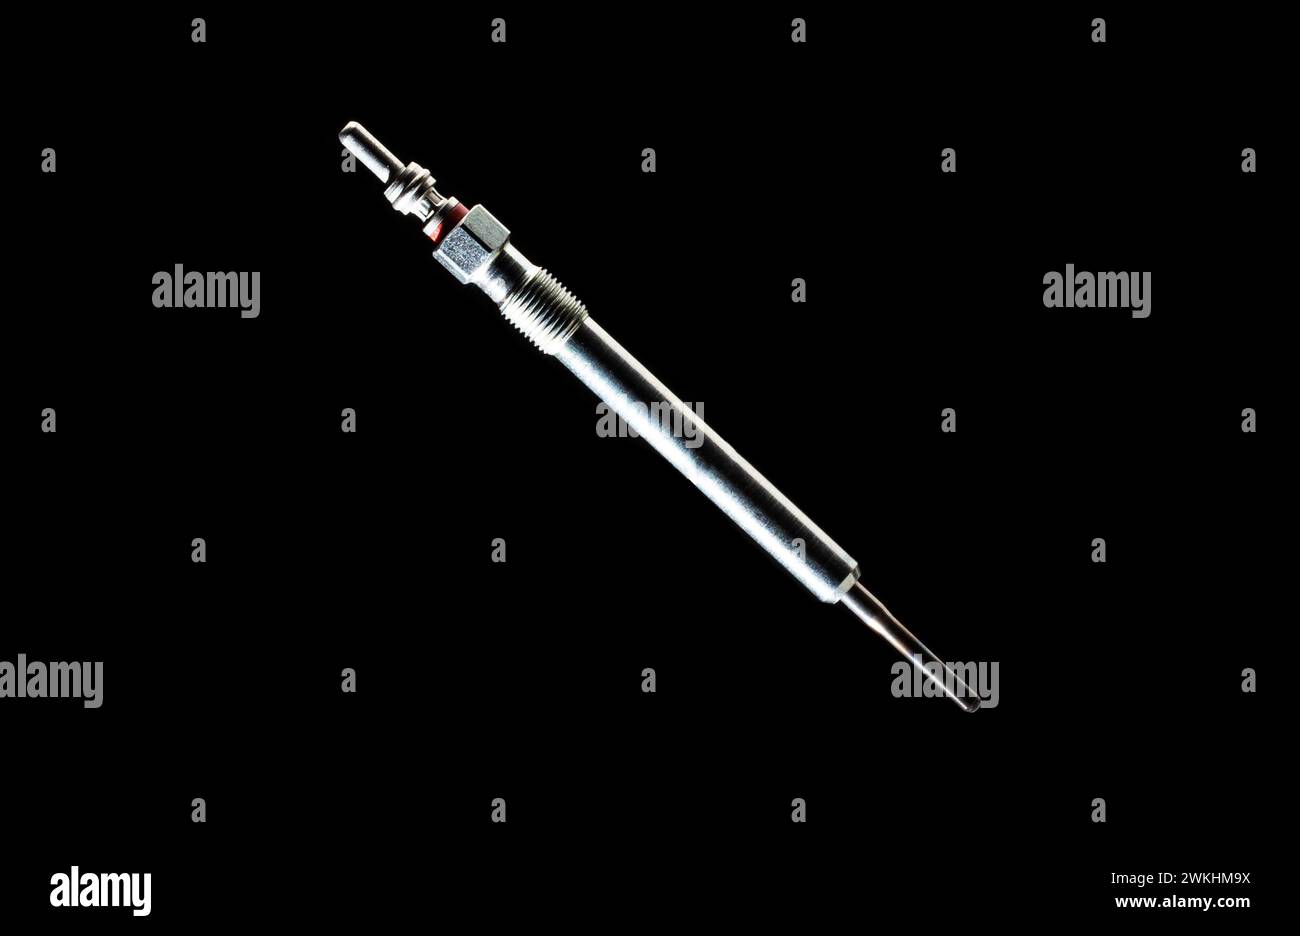 Modern glow plug with a ceramic rod for a diesel engine on a black background, isolate, close-up. Heating element of the combustion chamber of a car, Stock Photo